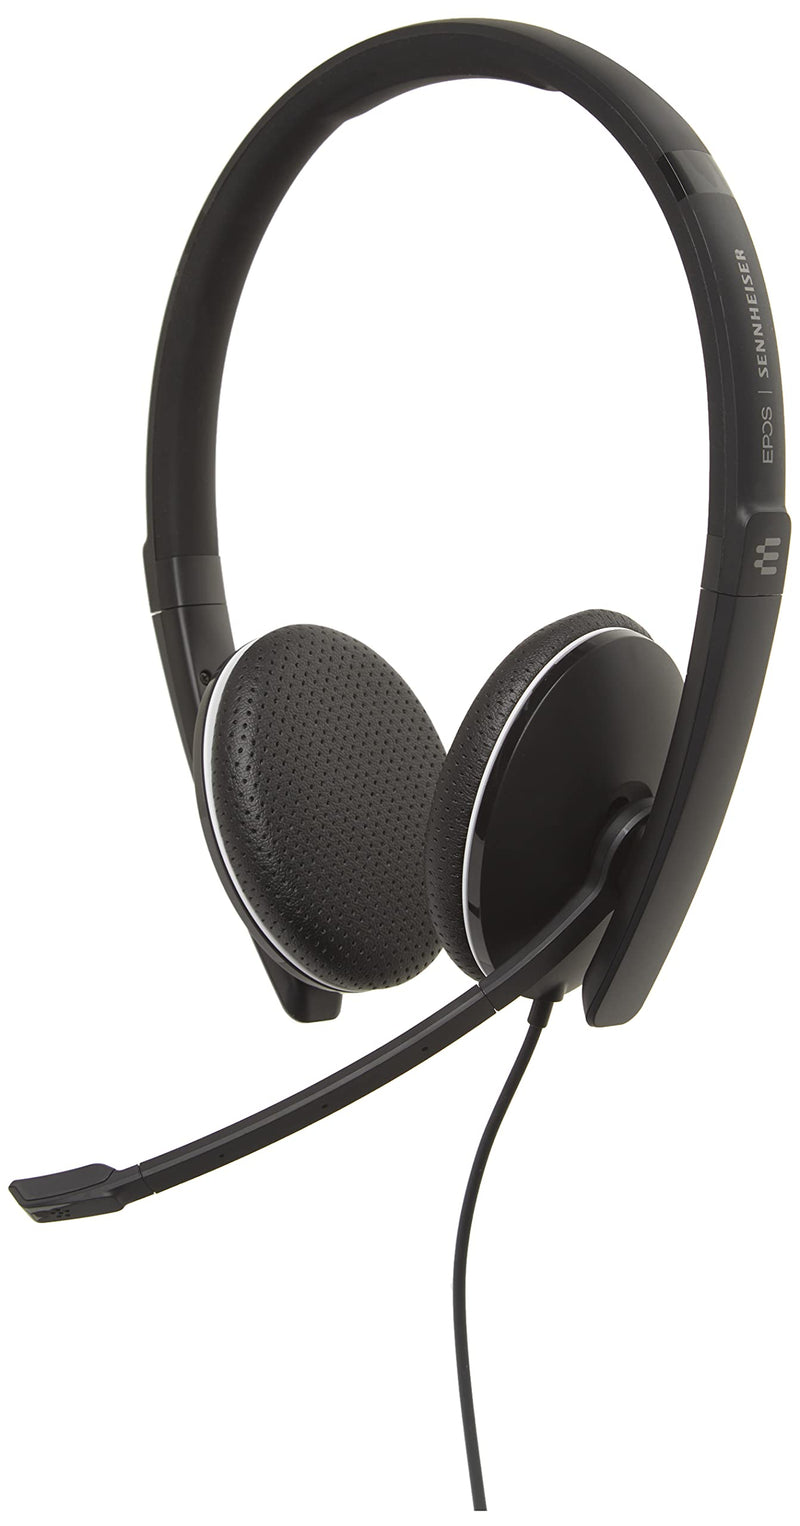  [AUSTRALIA] - Sennheiser SC 165 USB (508317) - Double-Sided (Binaural) Headset for Business Professionals | with HD Stereo Sound, Noise-Cancelling Microphone, & USB Connector (Black)